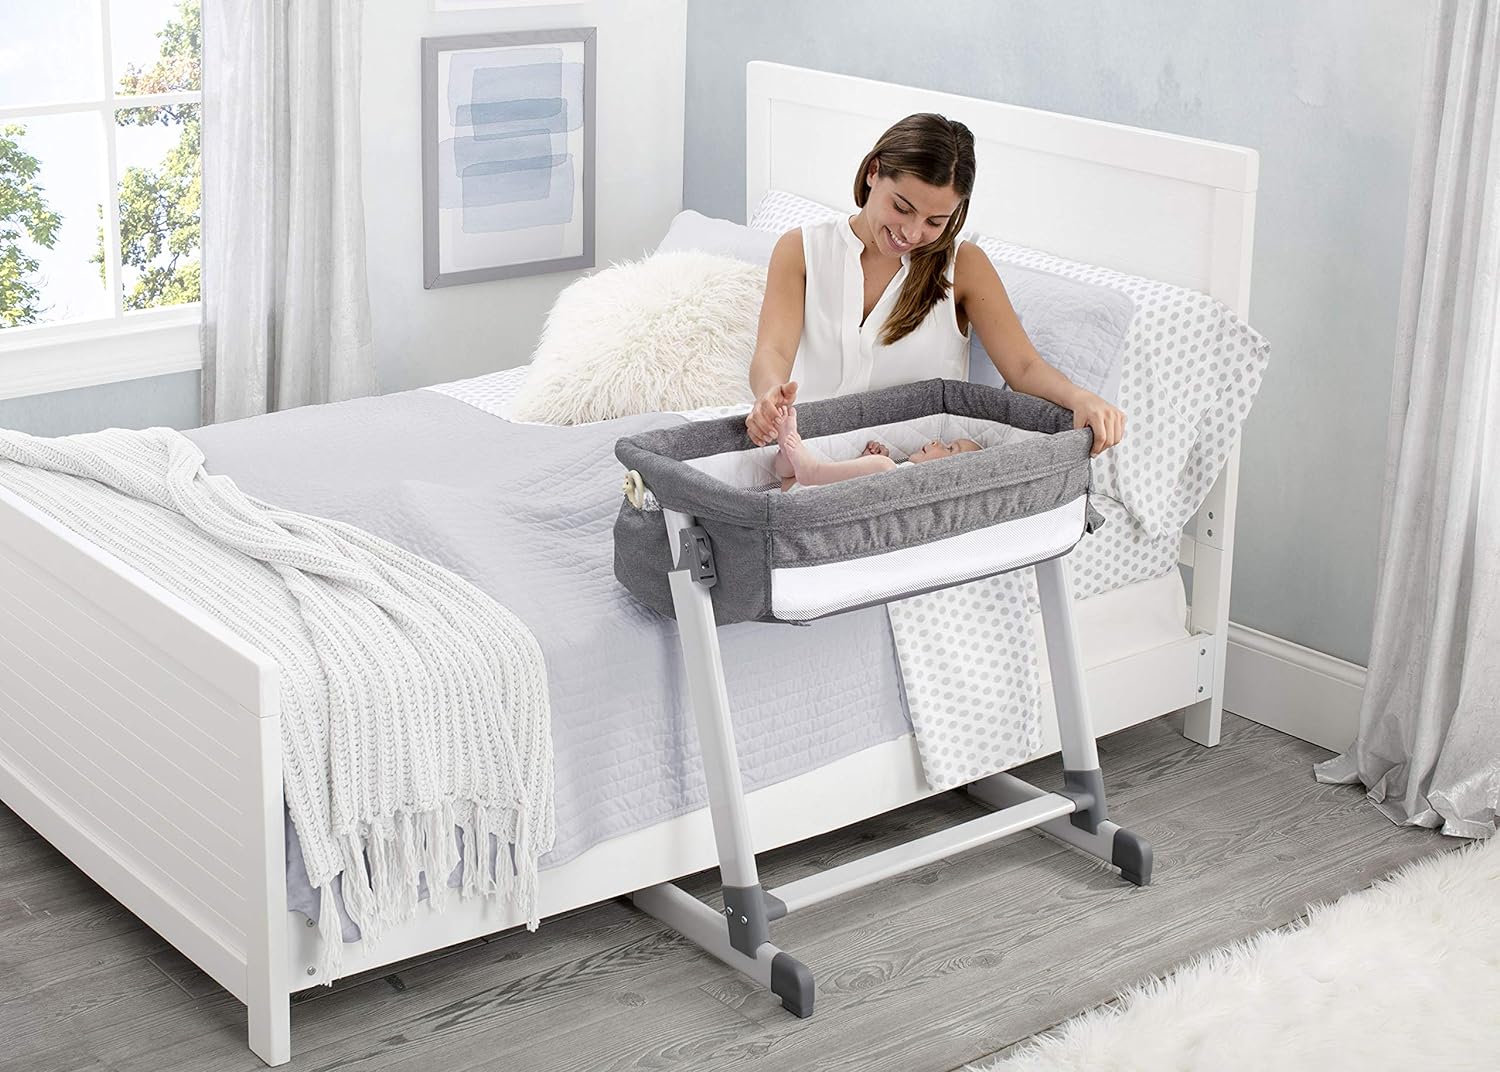 Simmons Kids By The Bed City Sleeper Bassinet - Adjustable Height Portable Crib with Wheels & Airflow Mesh, Grey Tweed